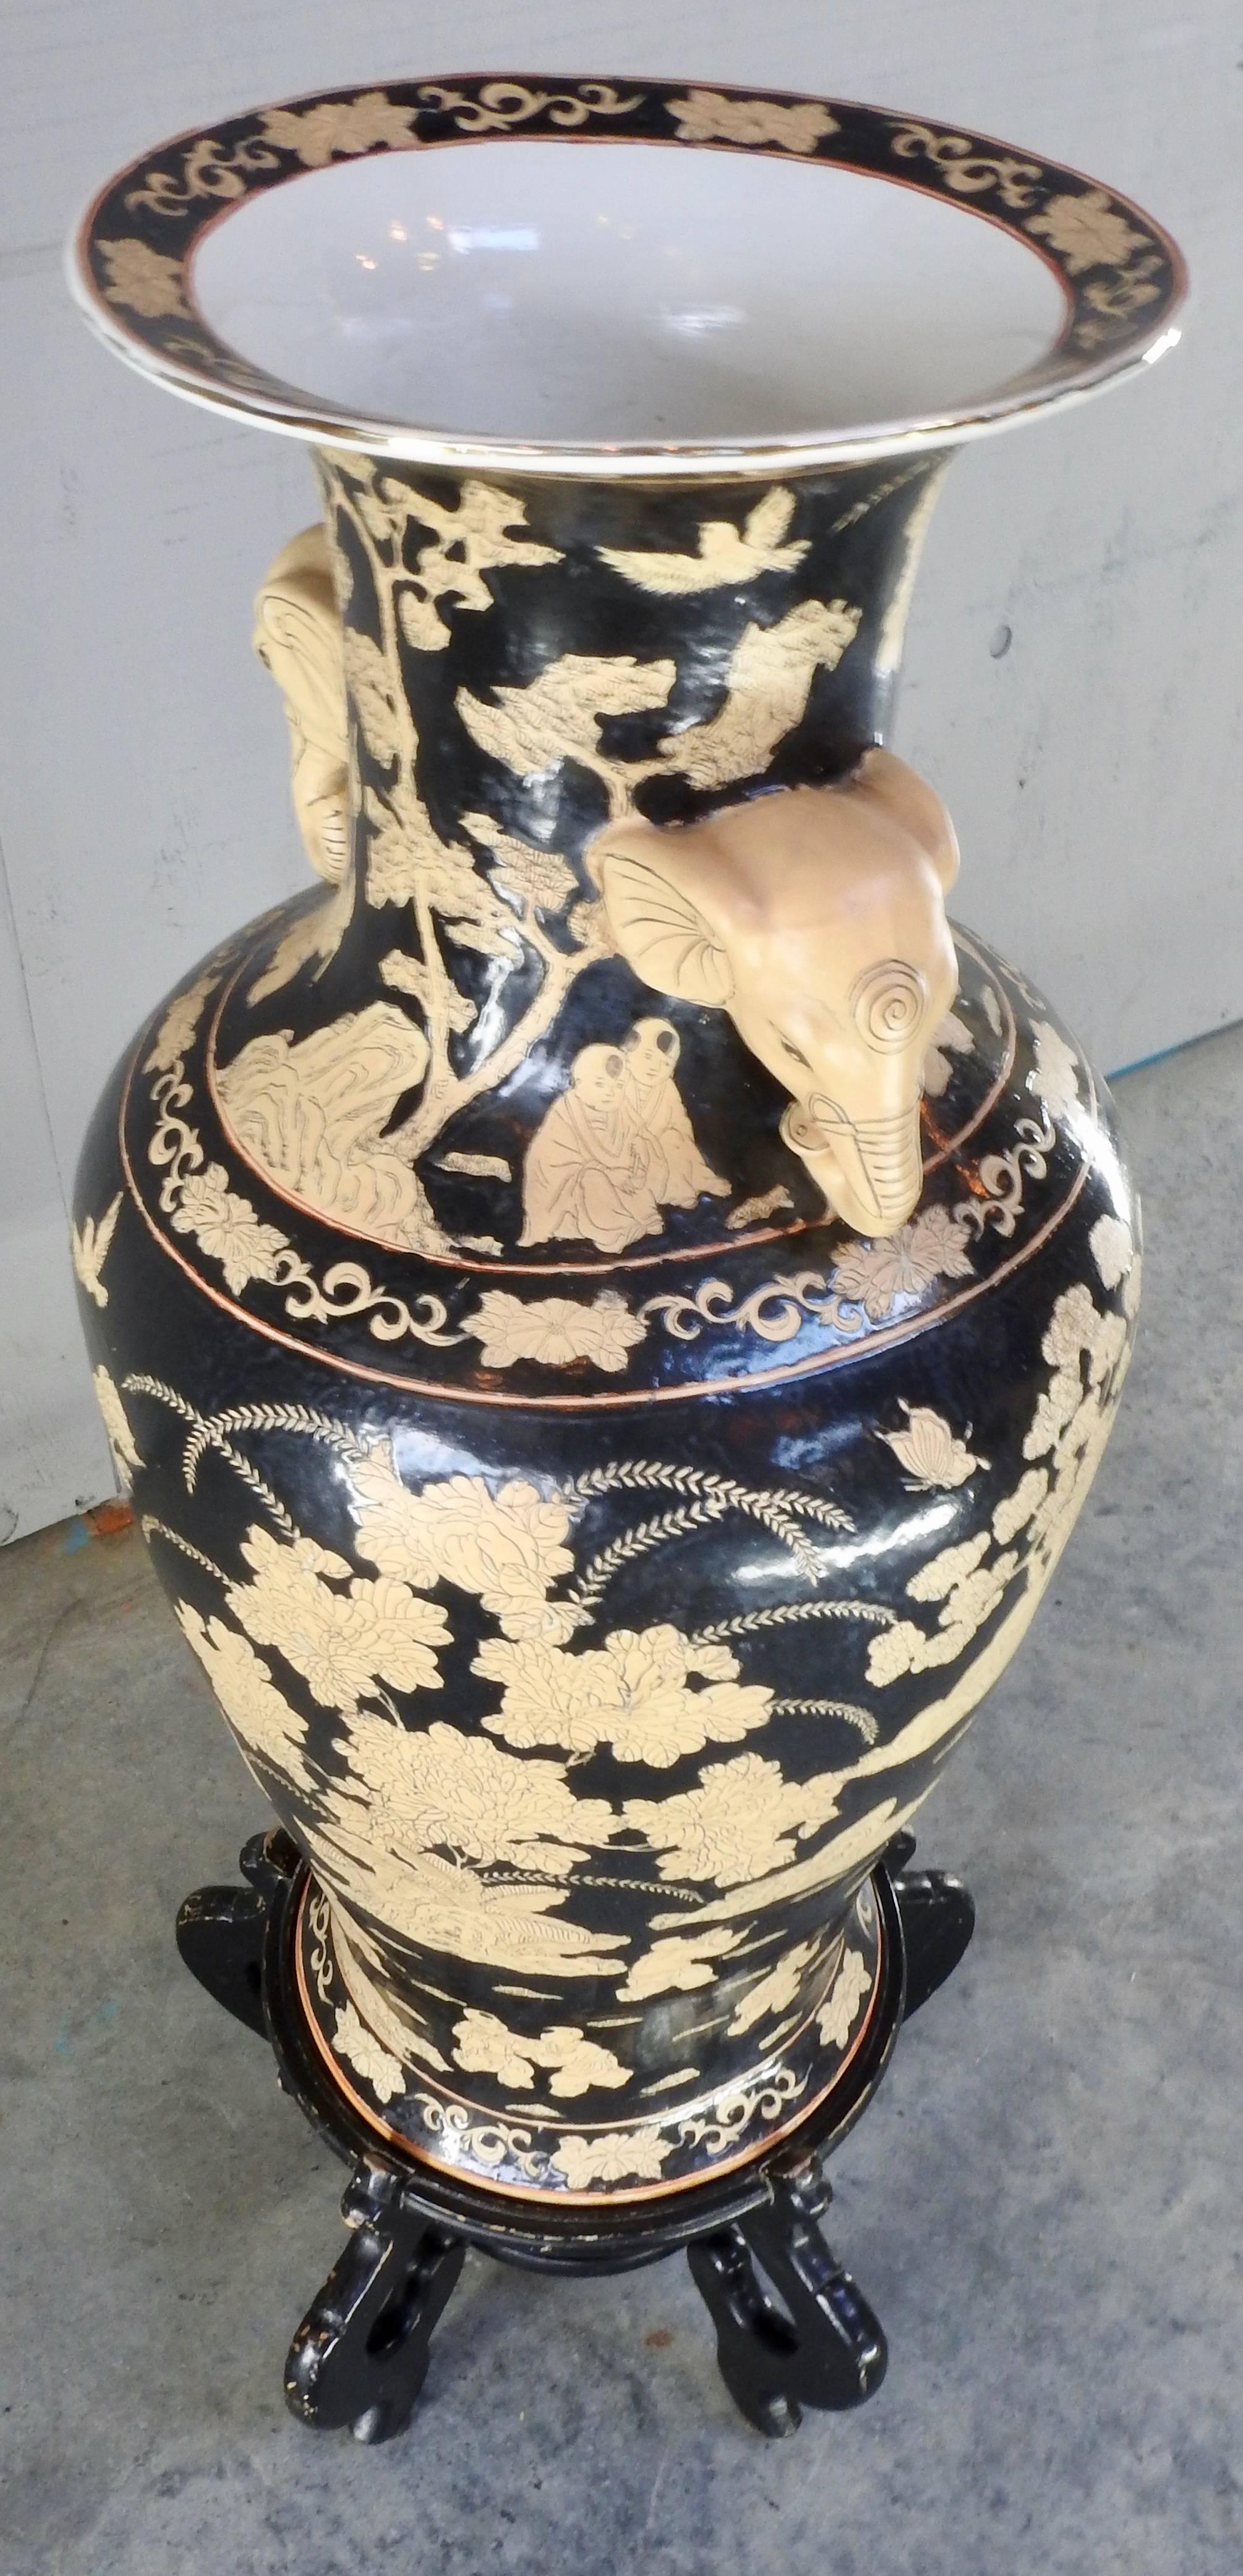 A pair of porcelain oriental urns accented with elephants for the handles. Black with ivory colored details featuring oriental scenes. The urns come with black lacquered stands.